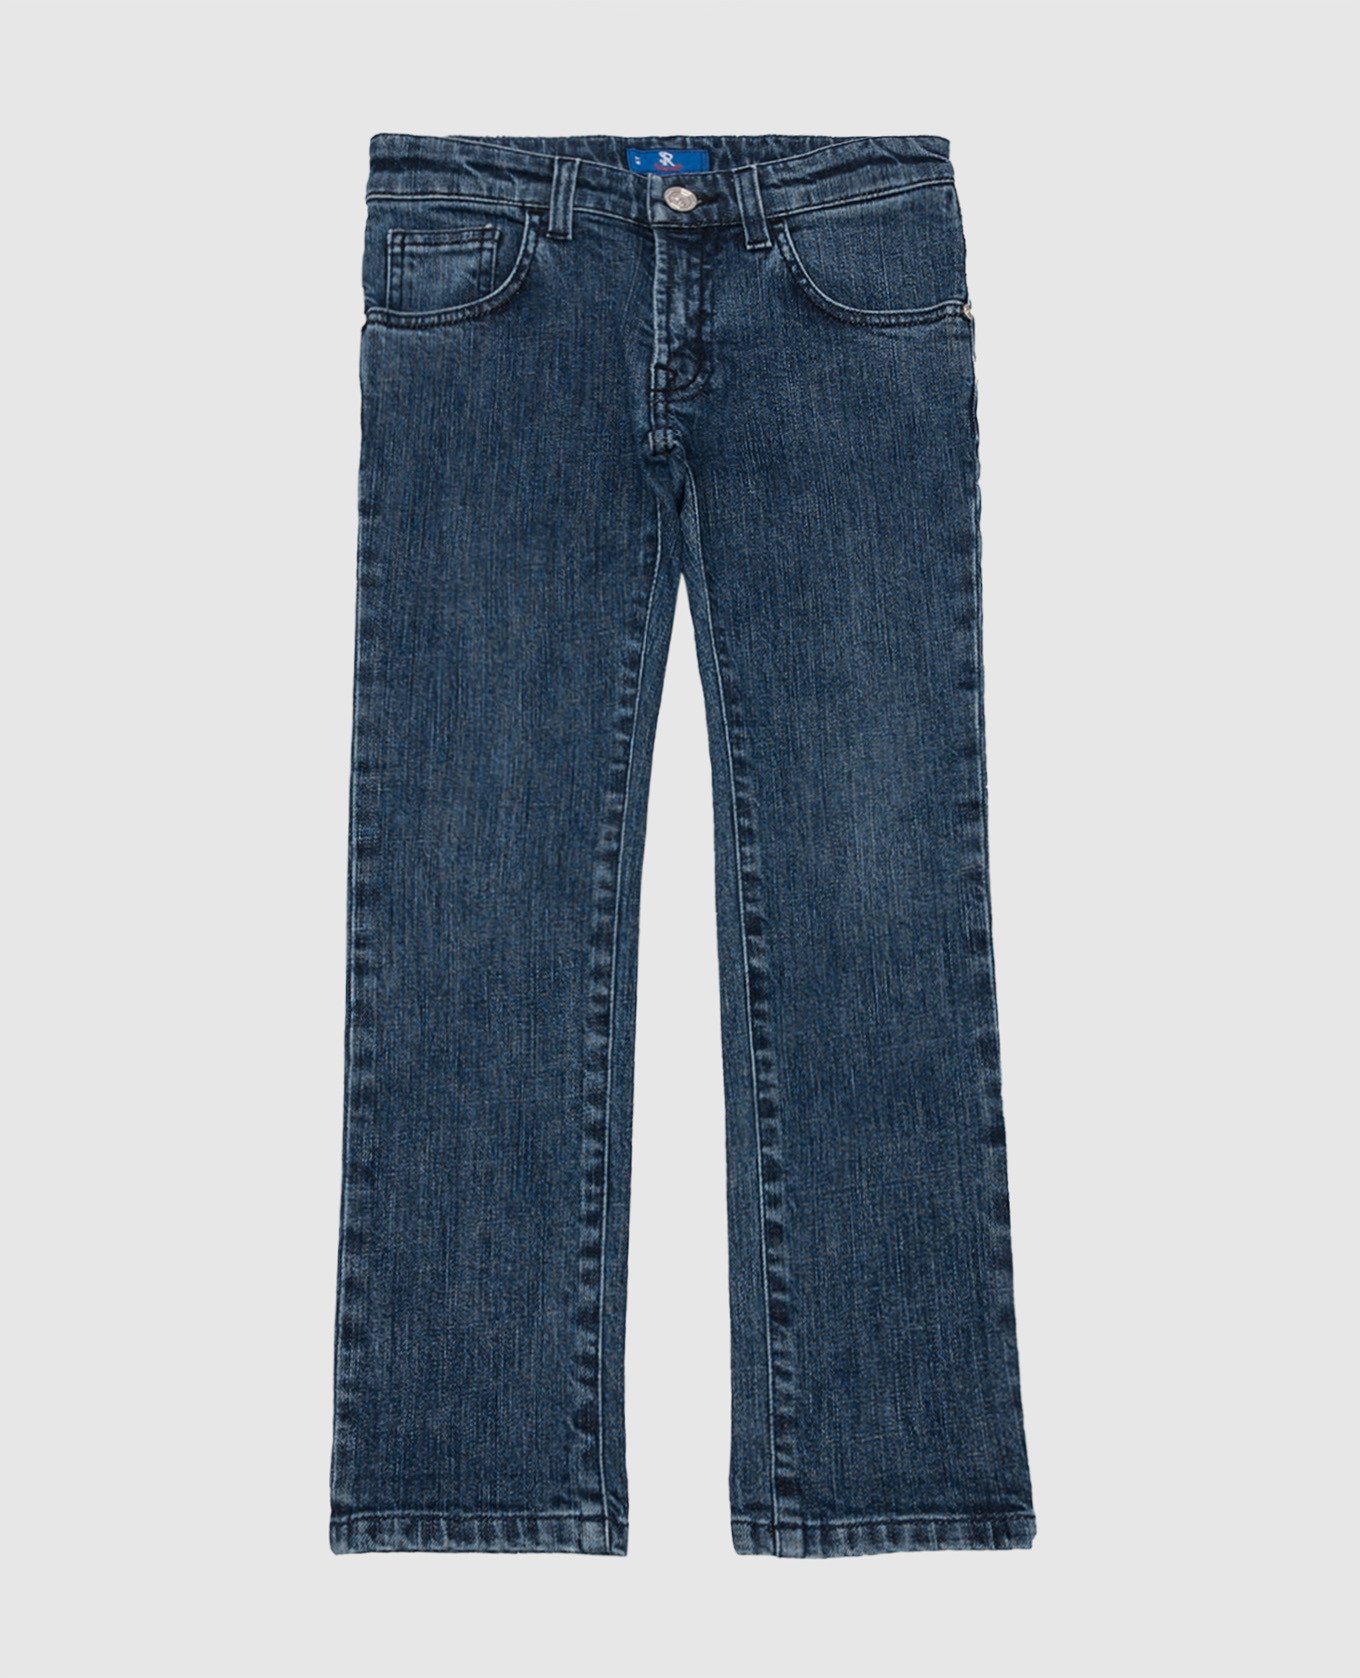 Children's blue jeans with logo embroidery